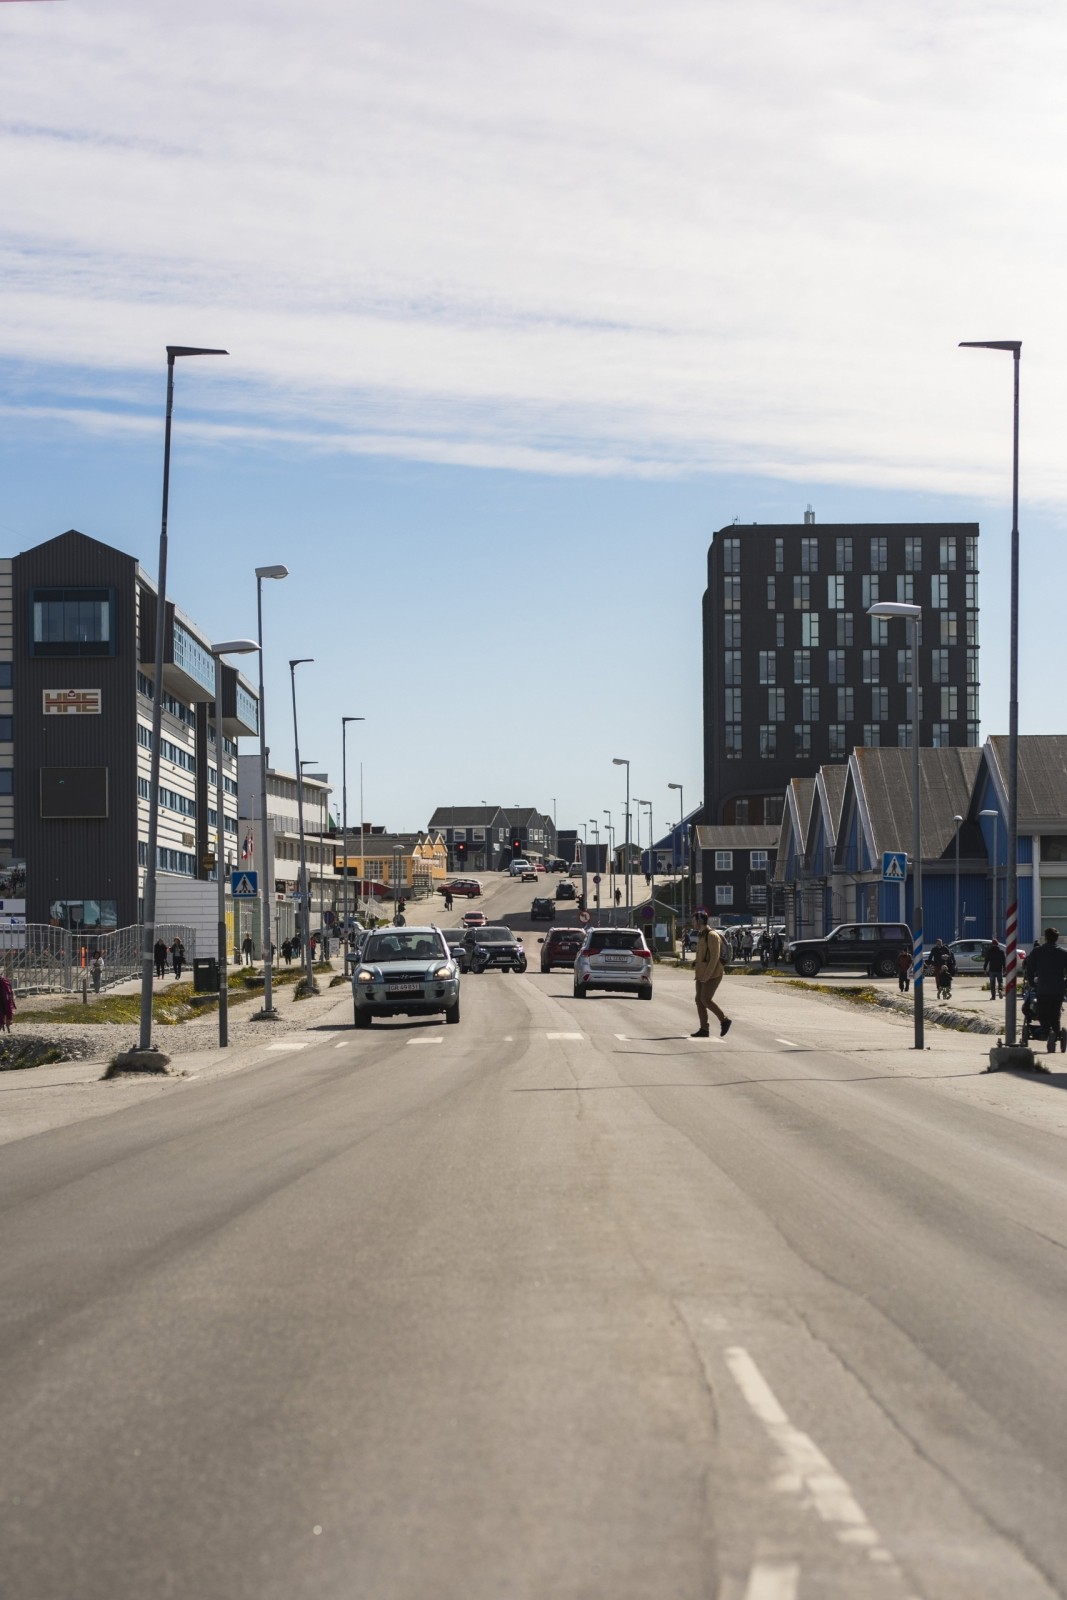 After-Traffic on the main road in Nuuk